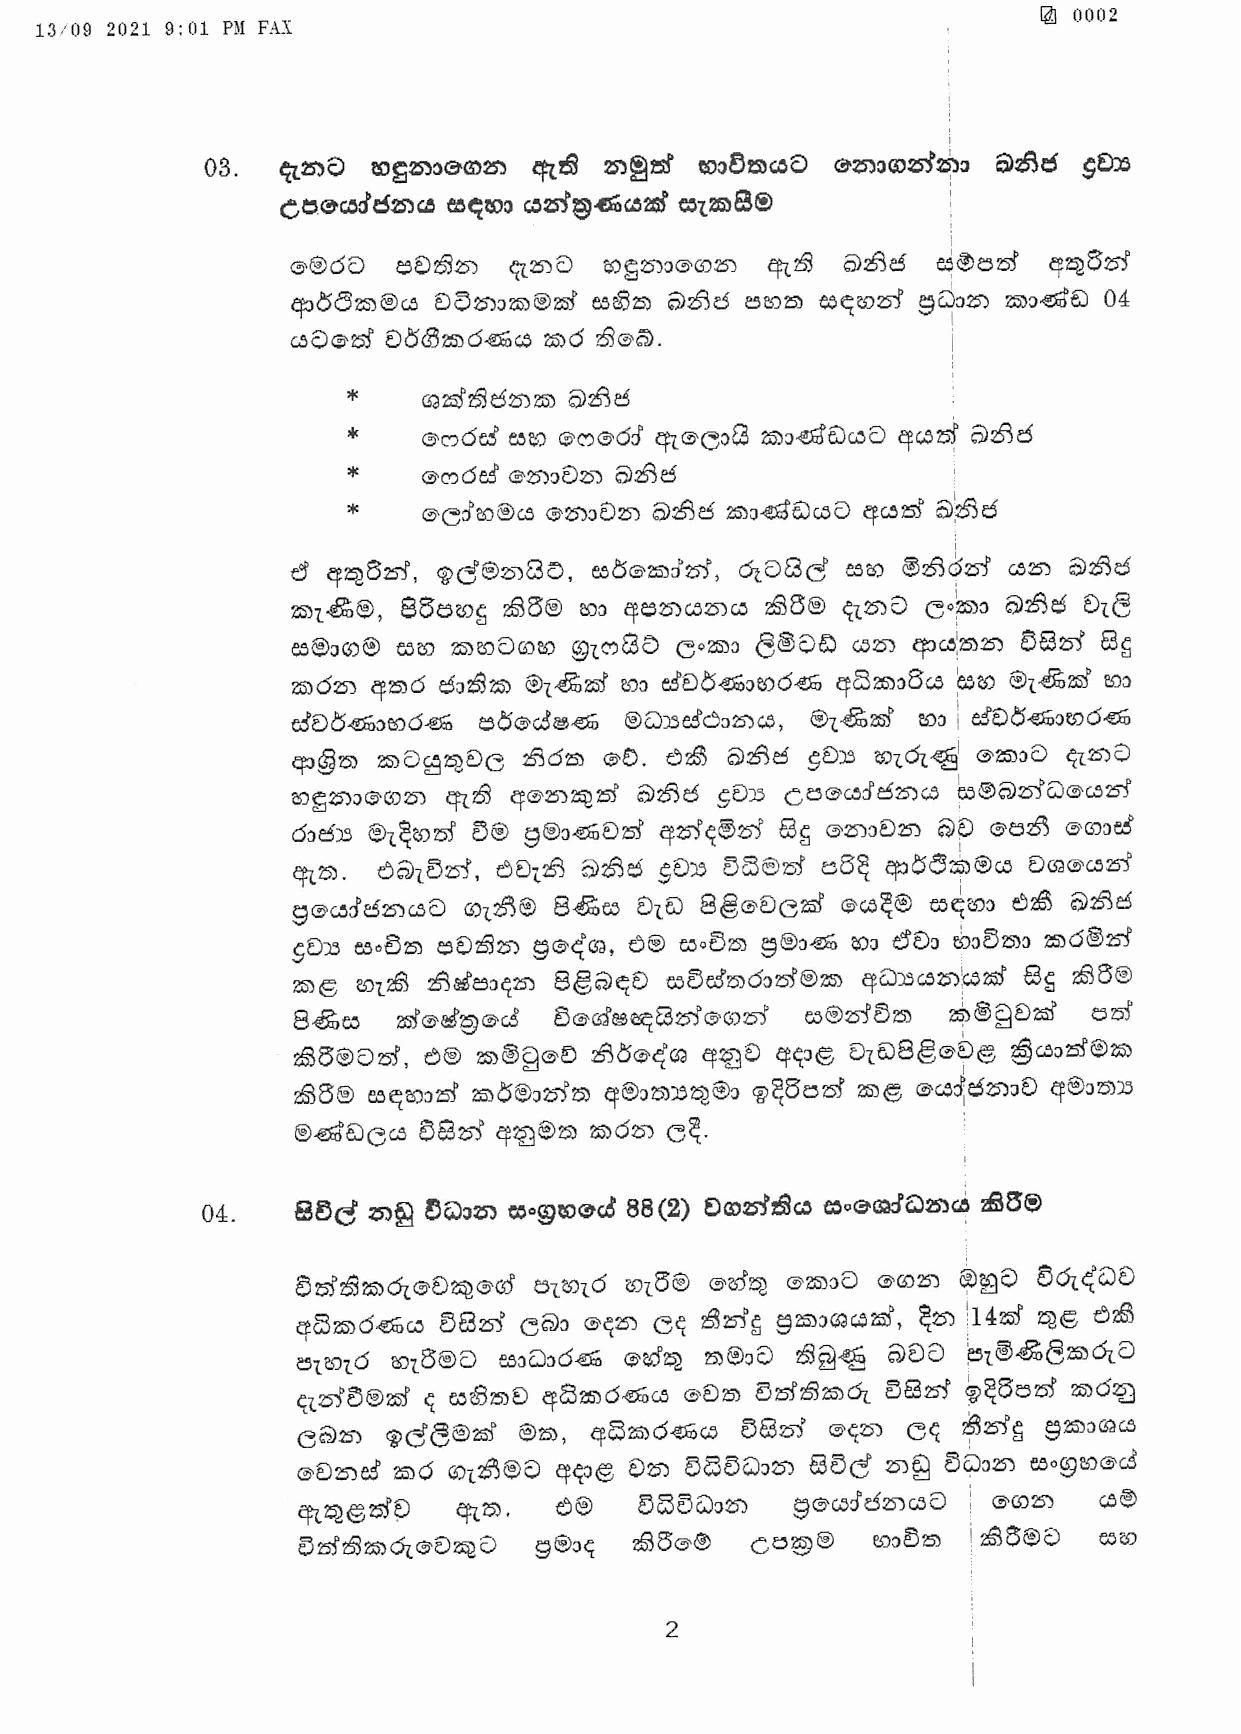 Cabinet Decision on 13.09.2021 page 001